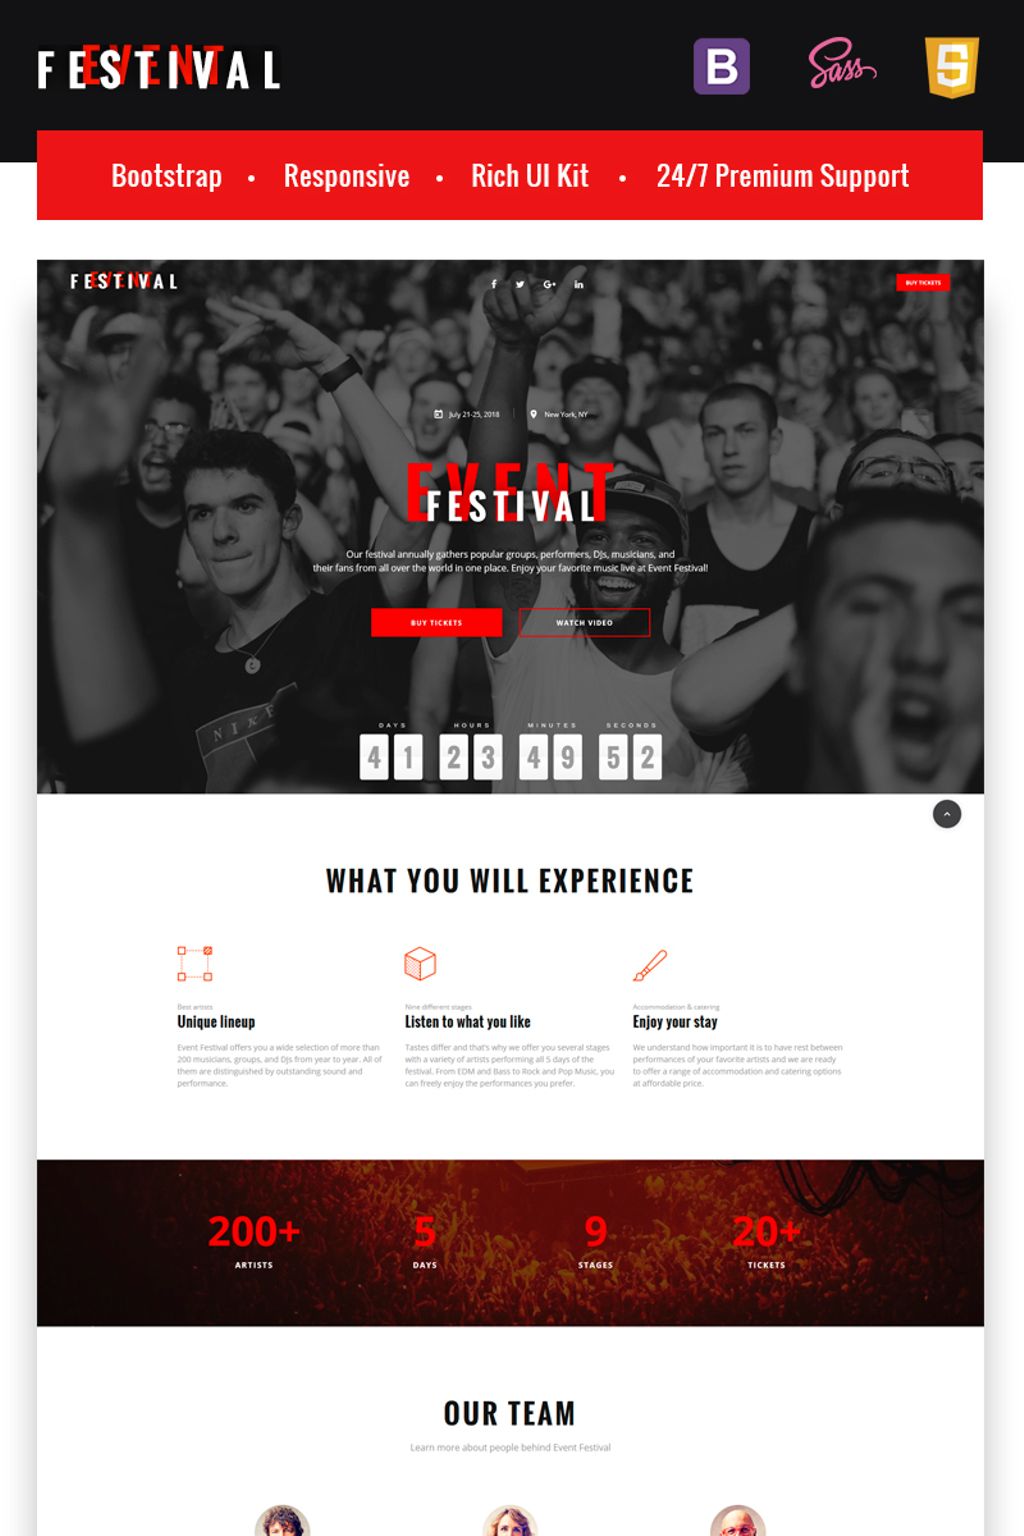 Festival Event - Responsive HTML5 Landing Page Template